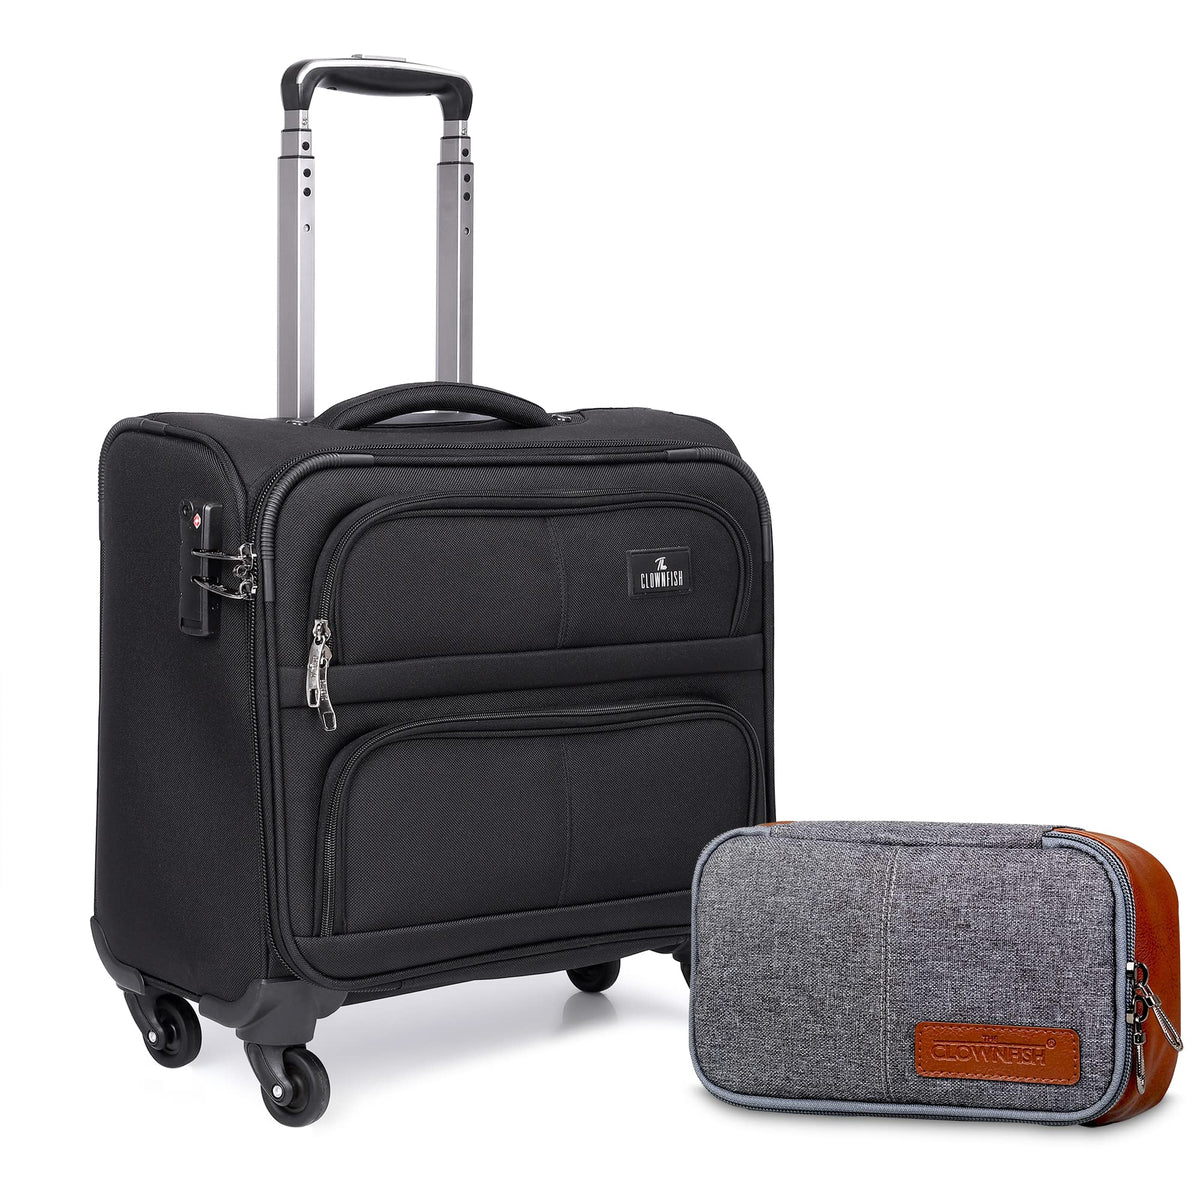 The Clownfish Set of Wanderer Laptop Roller Case with Toiletry Kit (Jet Black) Polyester